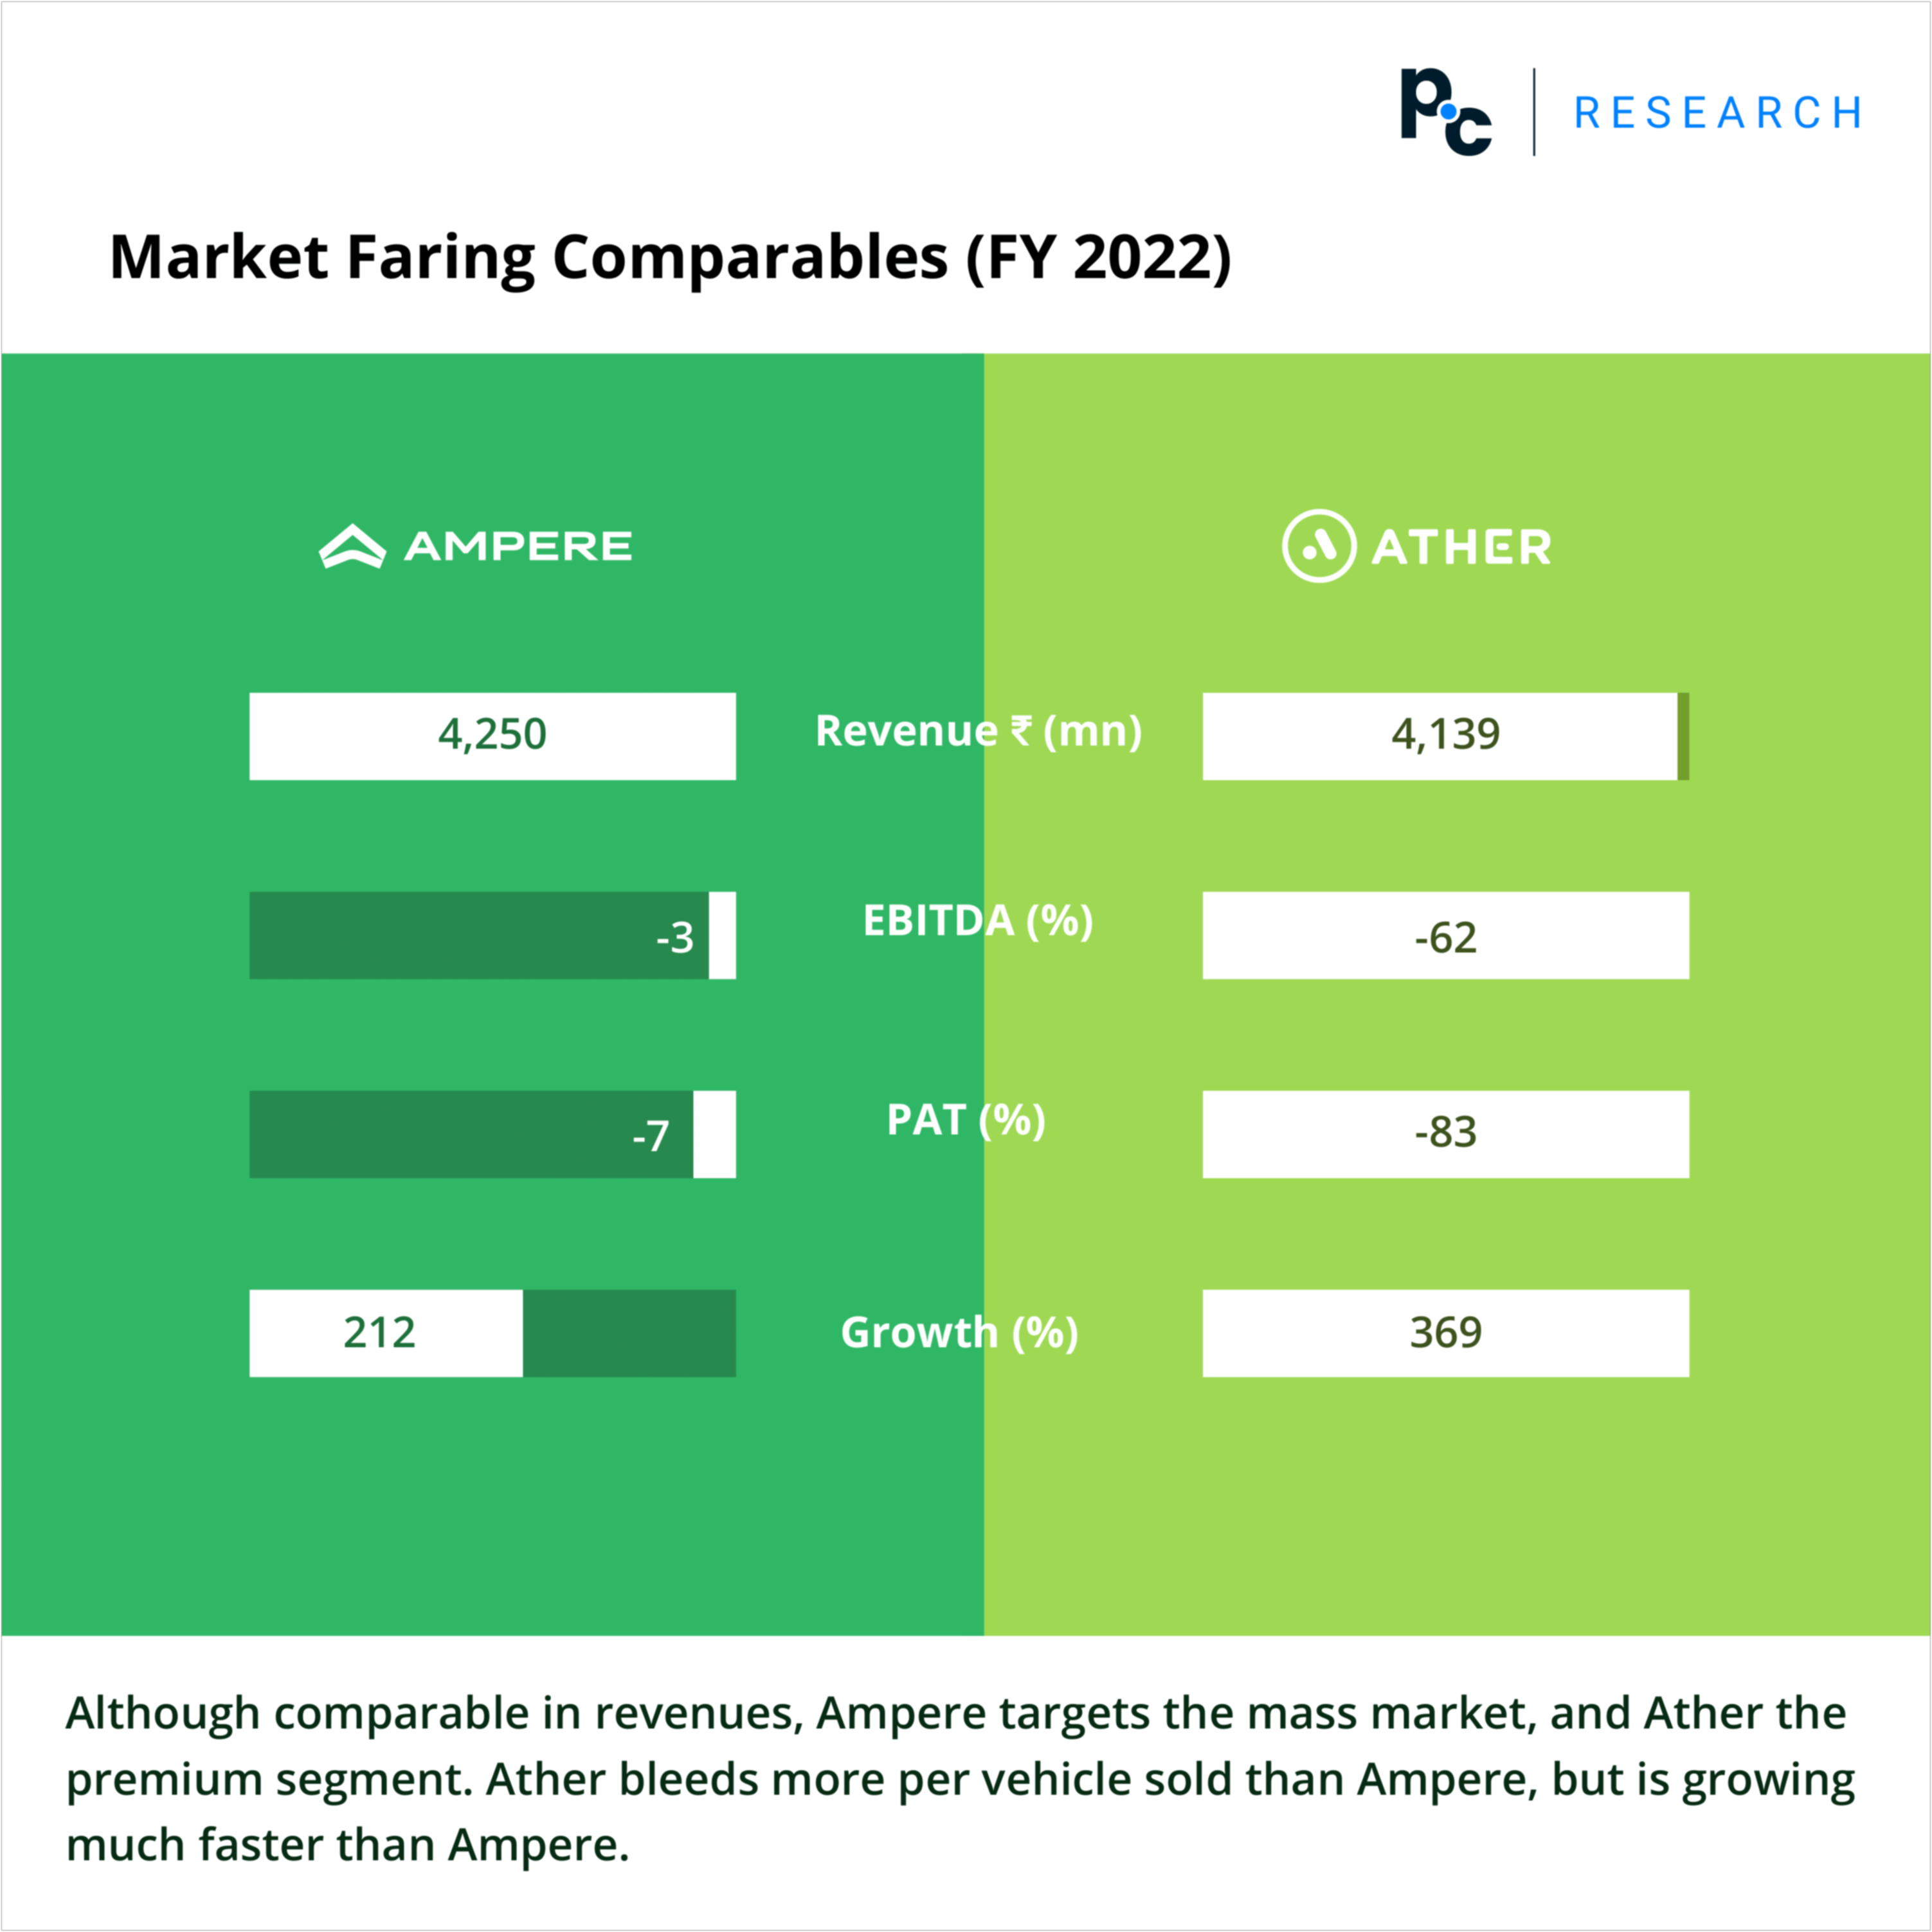 Market faring comparables of AMpere and Ather as seen on PrivateCircle Research.